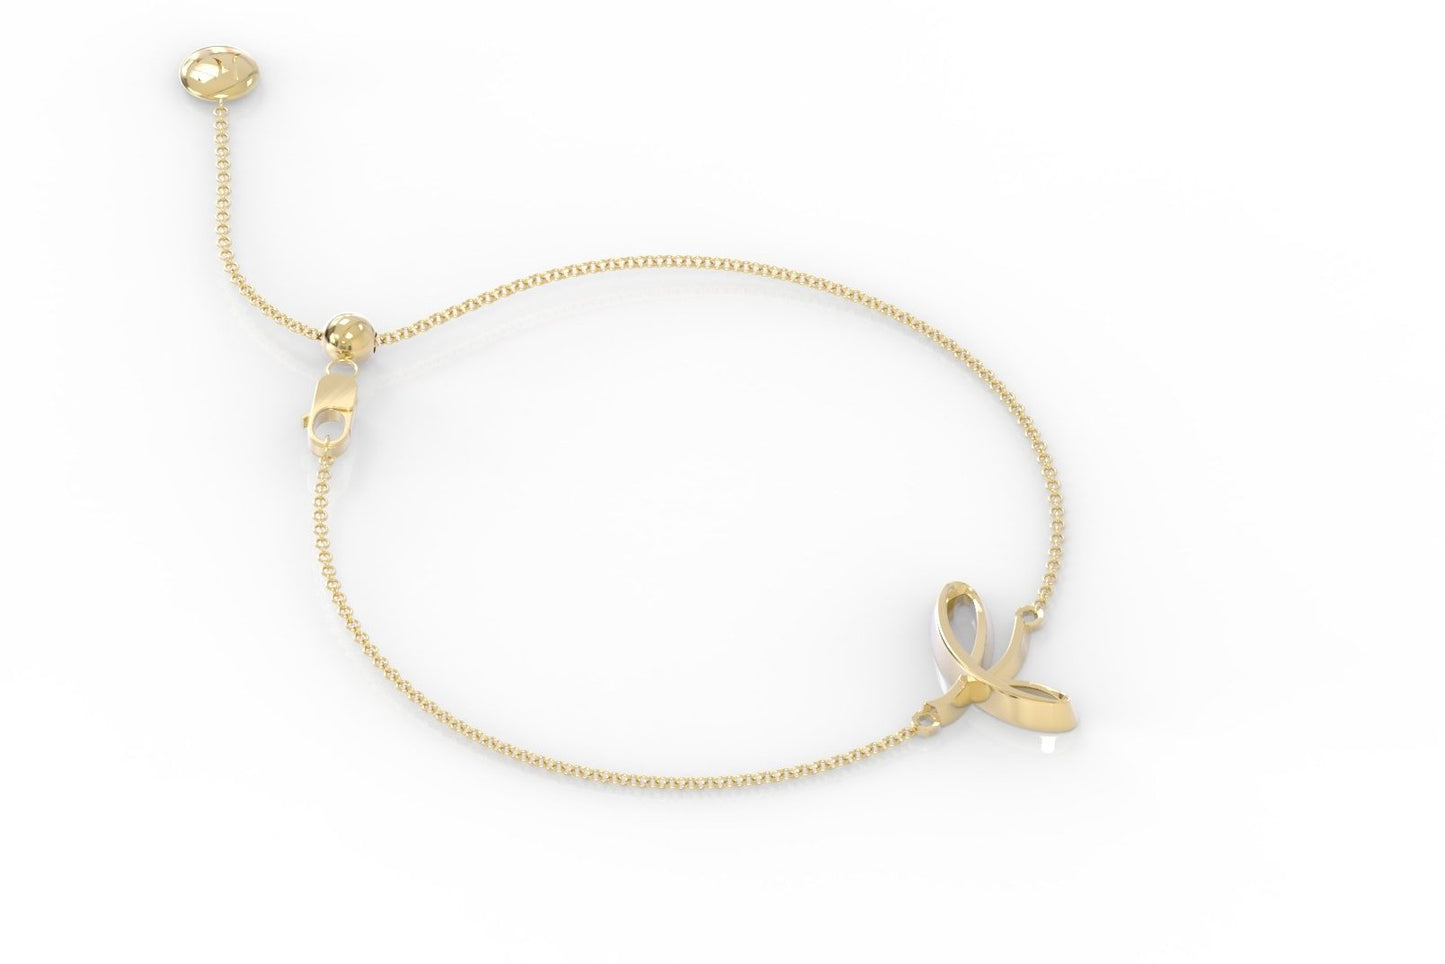 The Love Collect - "F" Bracelet